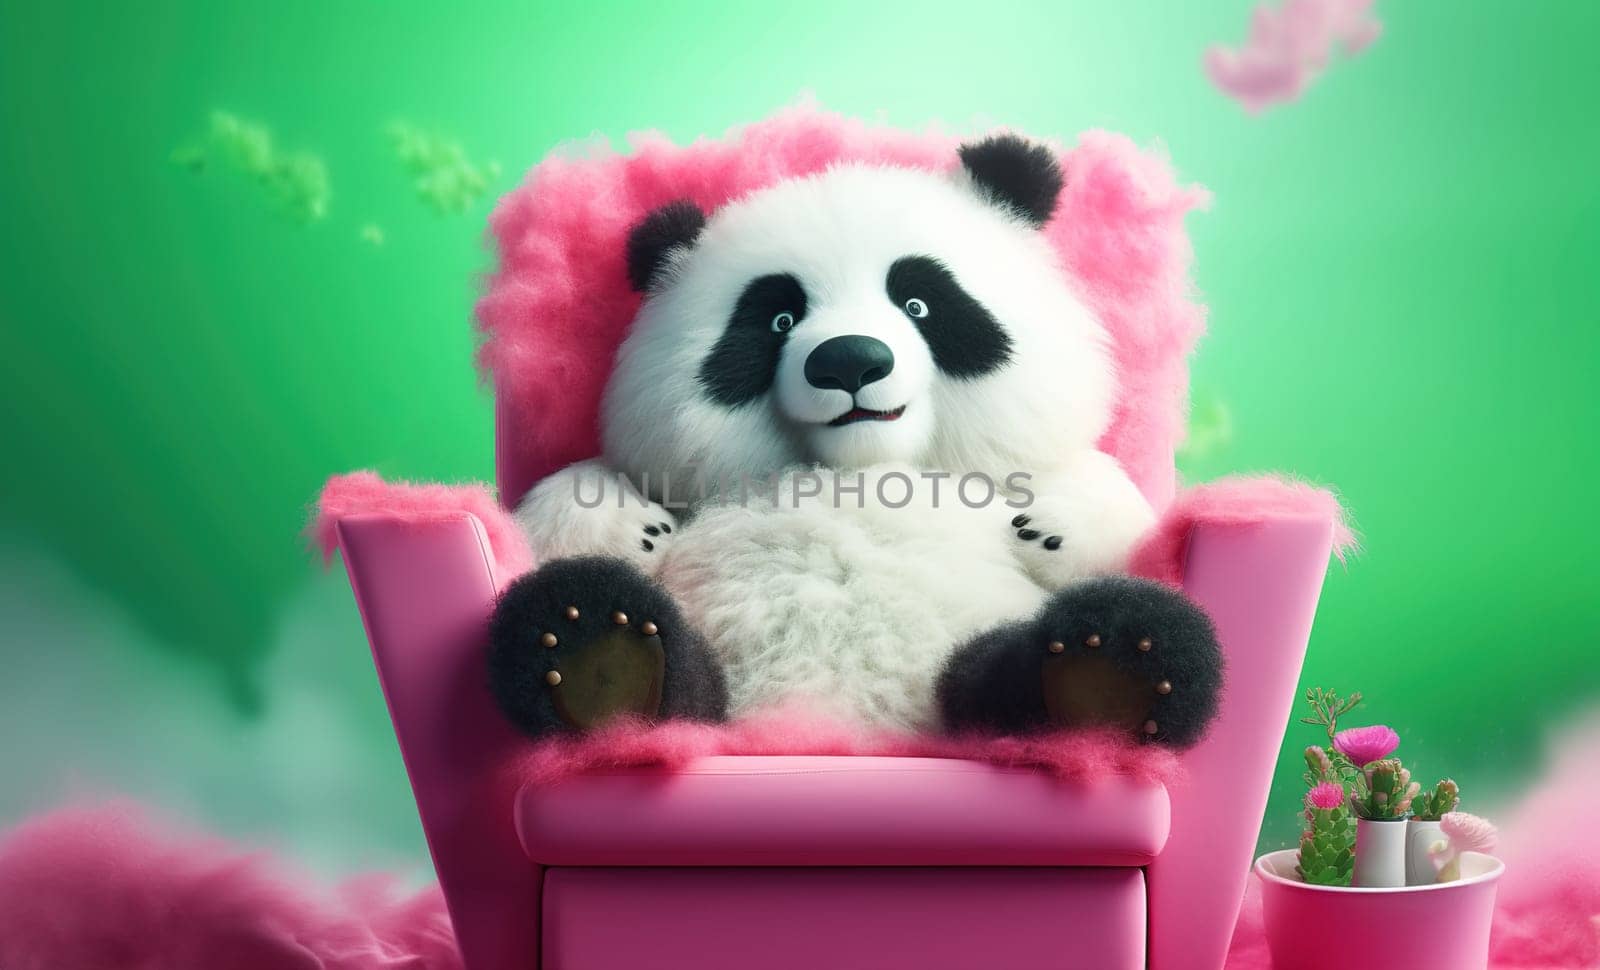 Cheerful plush cute panda resting in a woolen pink chair on a green cloudy background with potted cacti in fairy forest by KaterinaDalemans